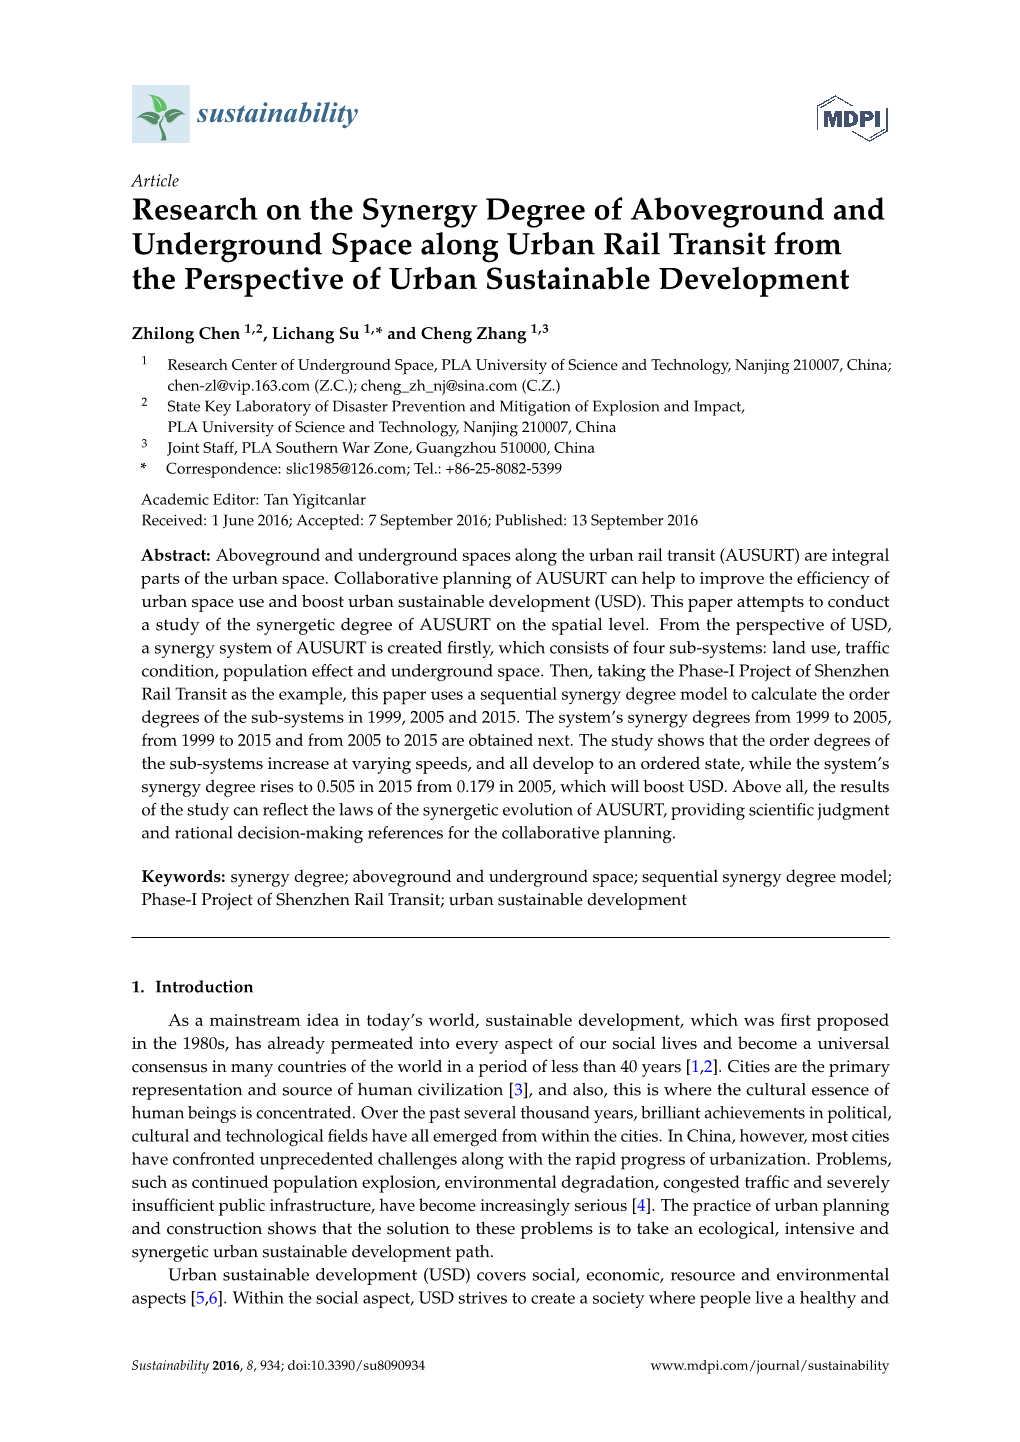 Research on the Synergy Degree of Aboveground and Underground Space Along Urban Rail Transit from the Perspective of Urban Sustainable Development